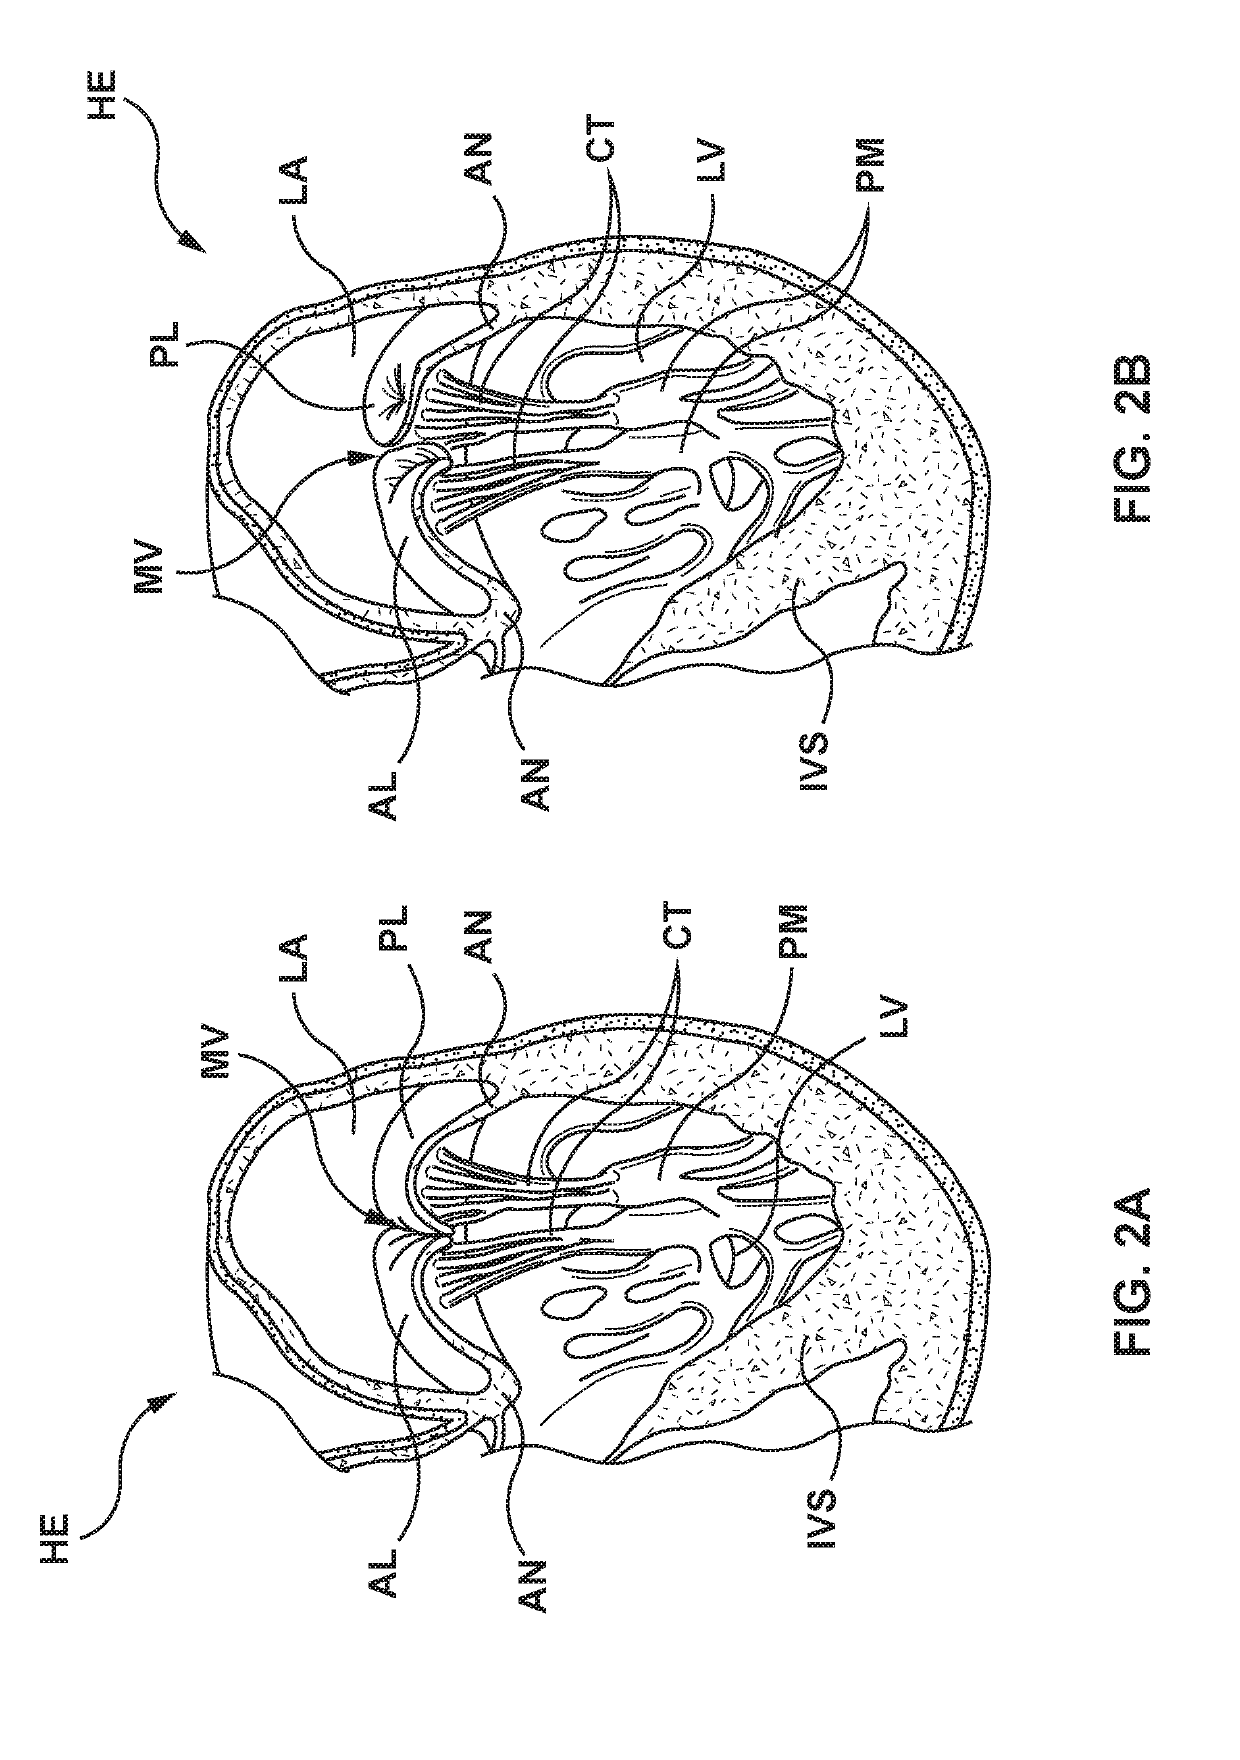 Flexible canopy valve repair systems and methods of use